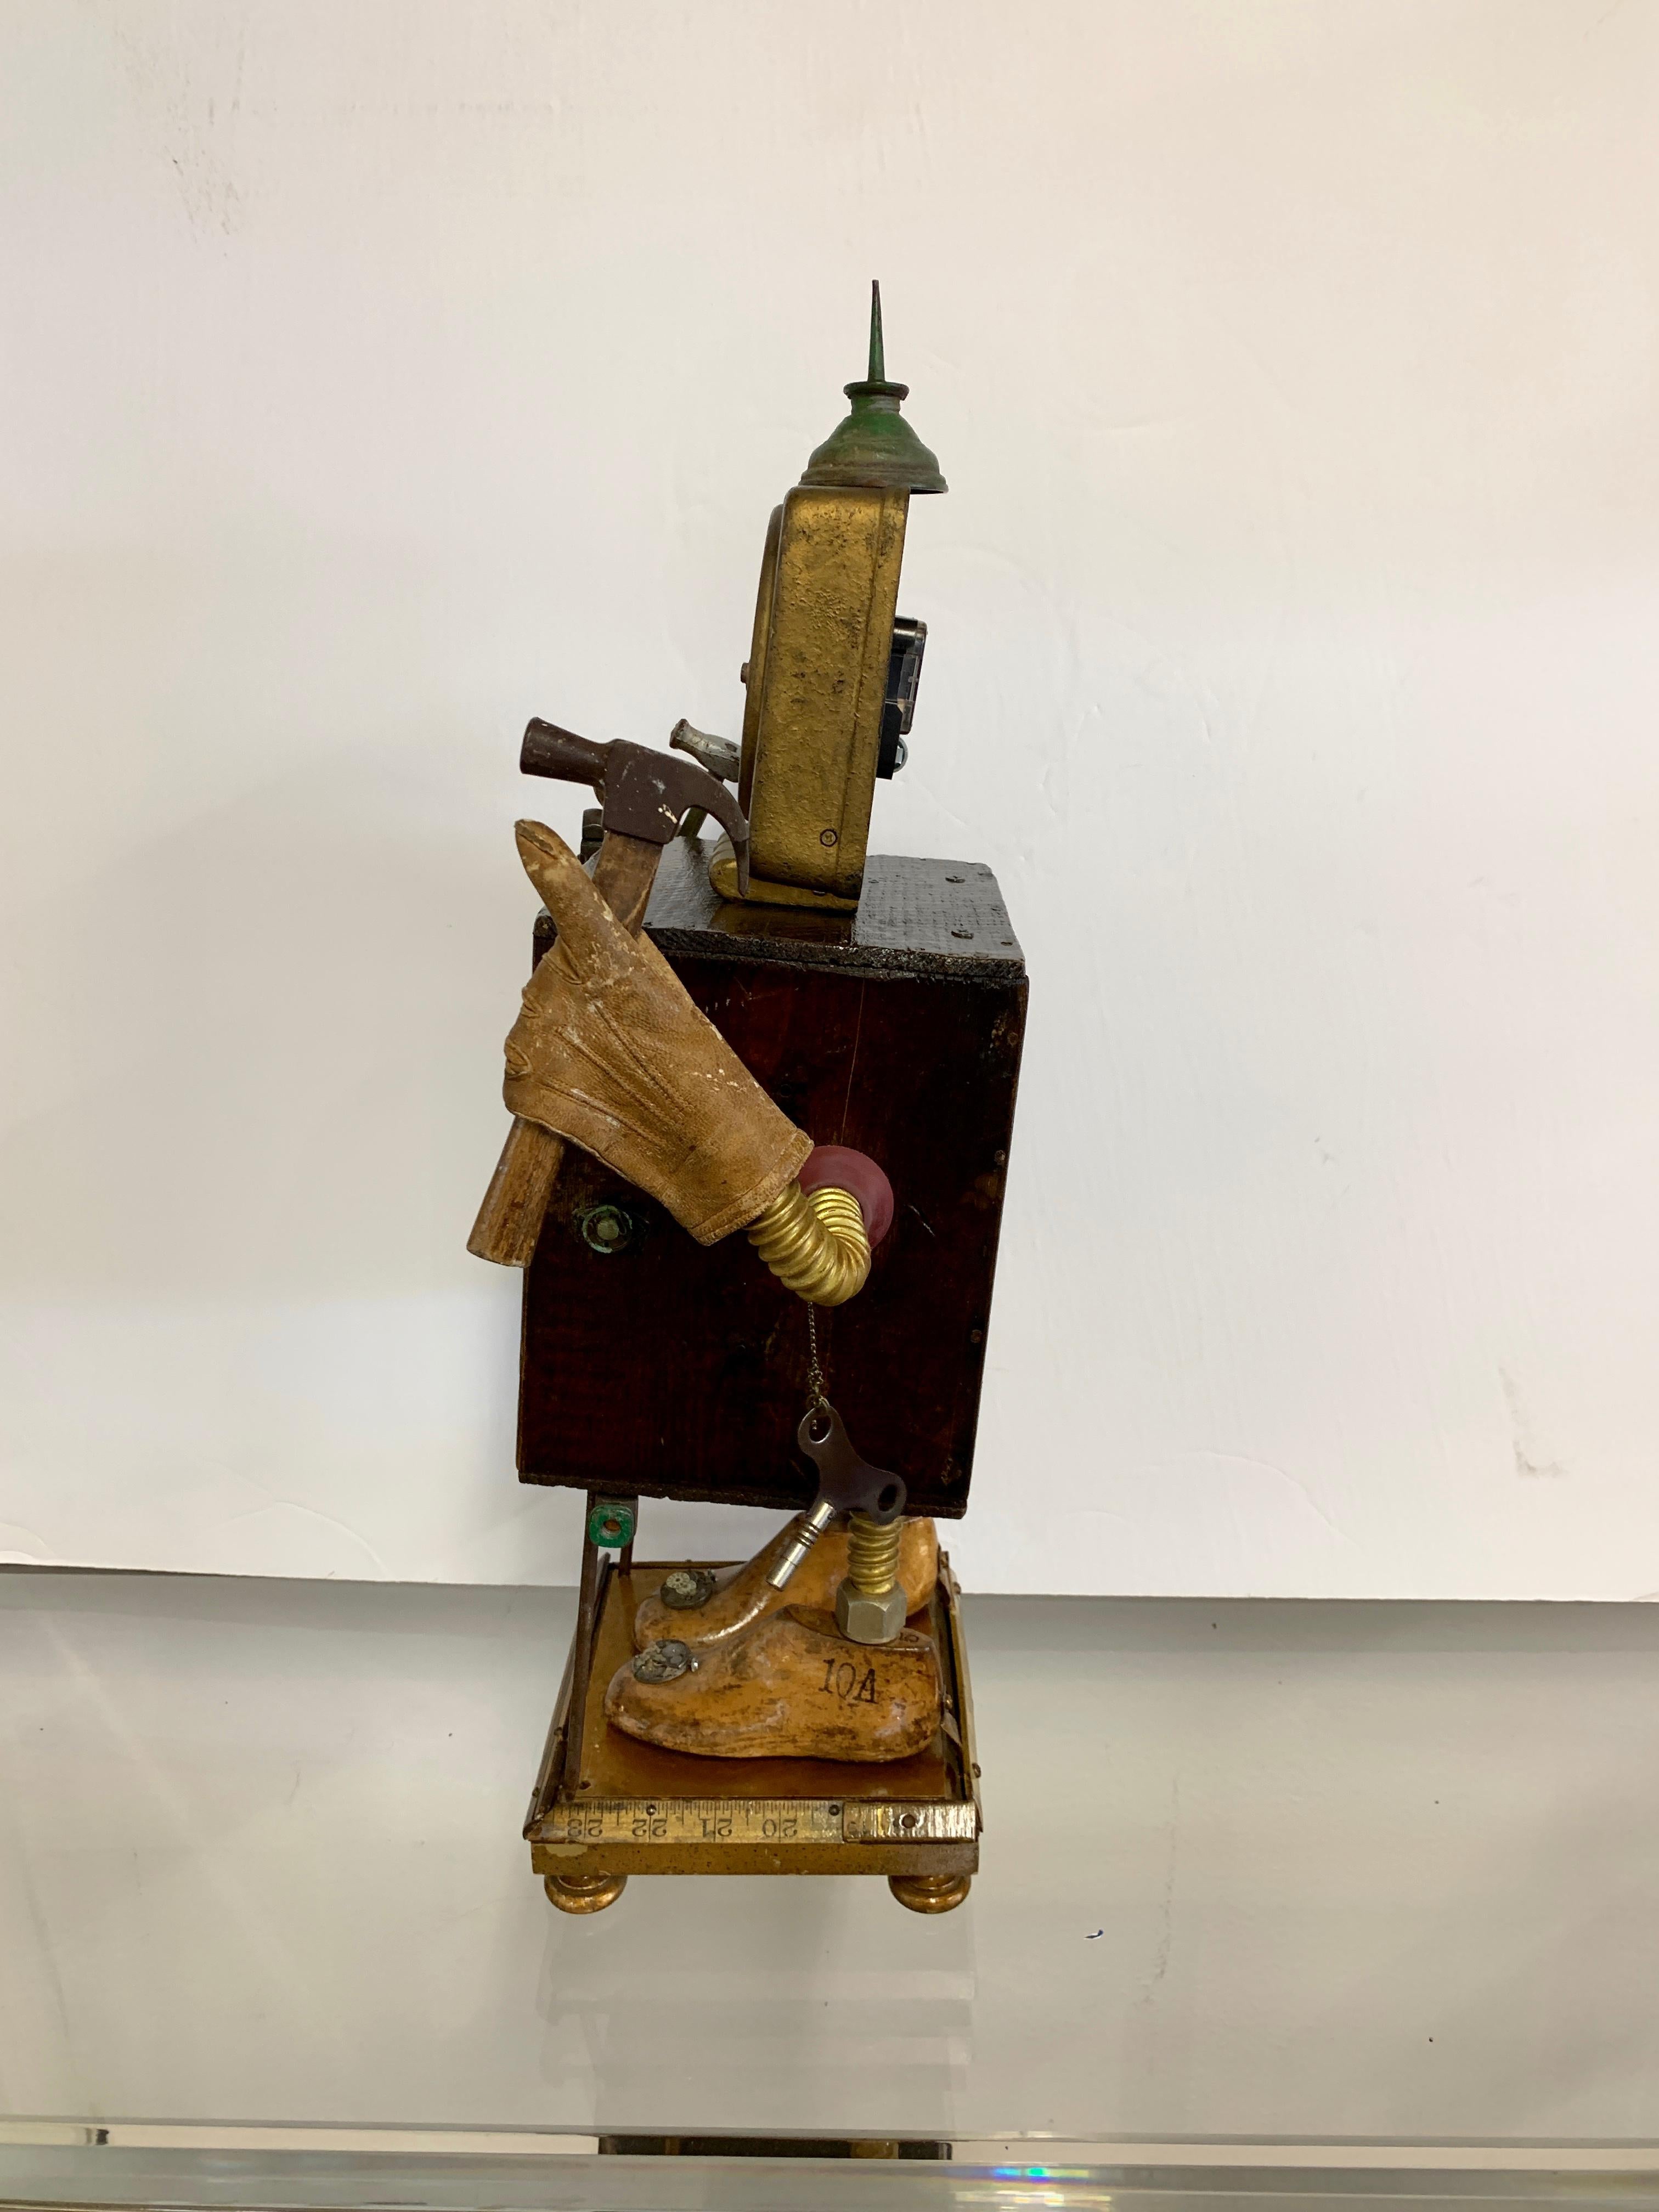 A wonderful outsider art sculpture by the noted artist Linda Semple. This piece is titled 